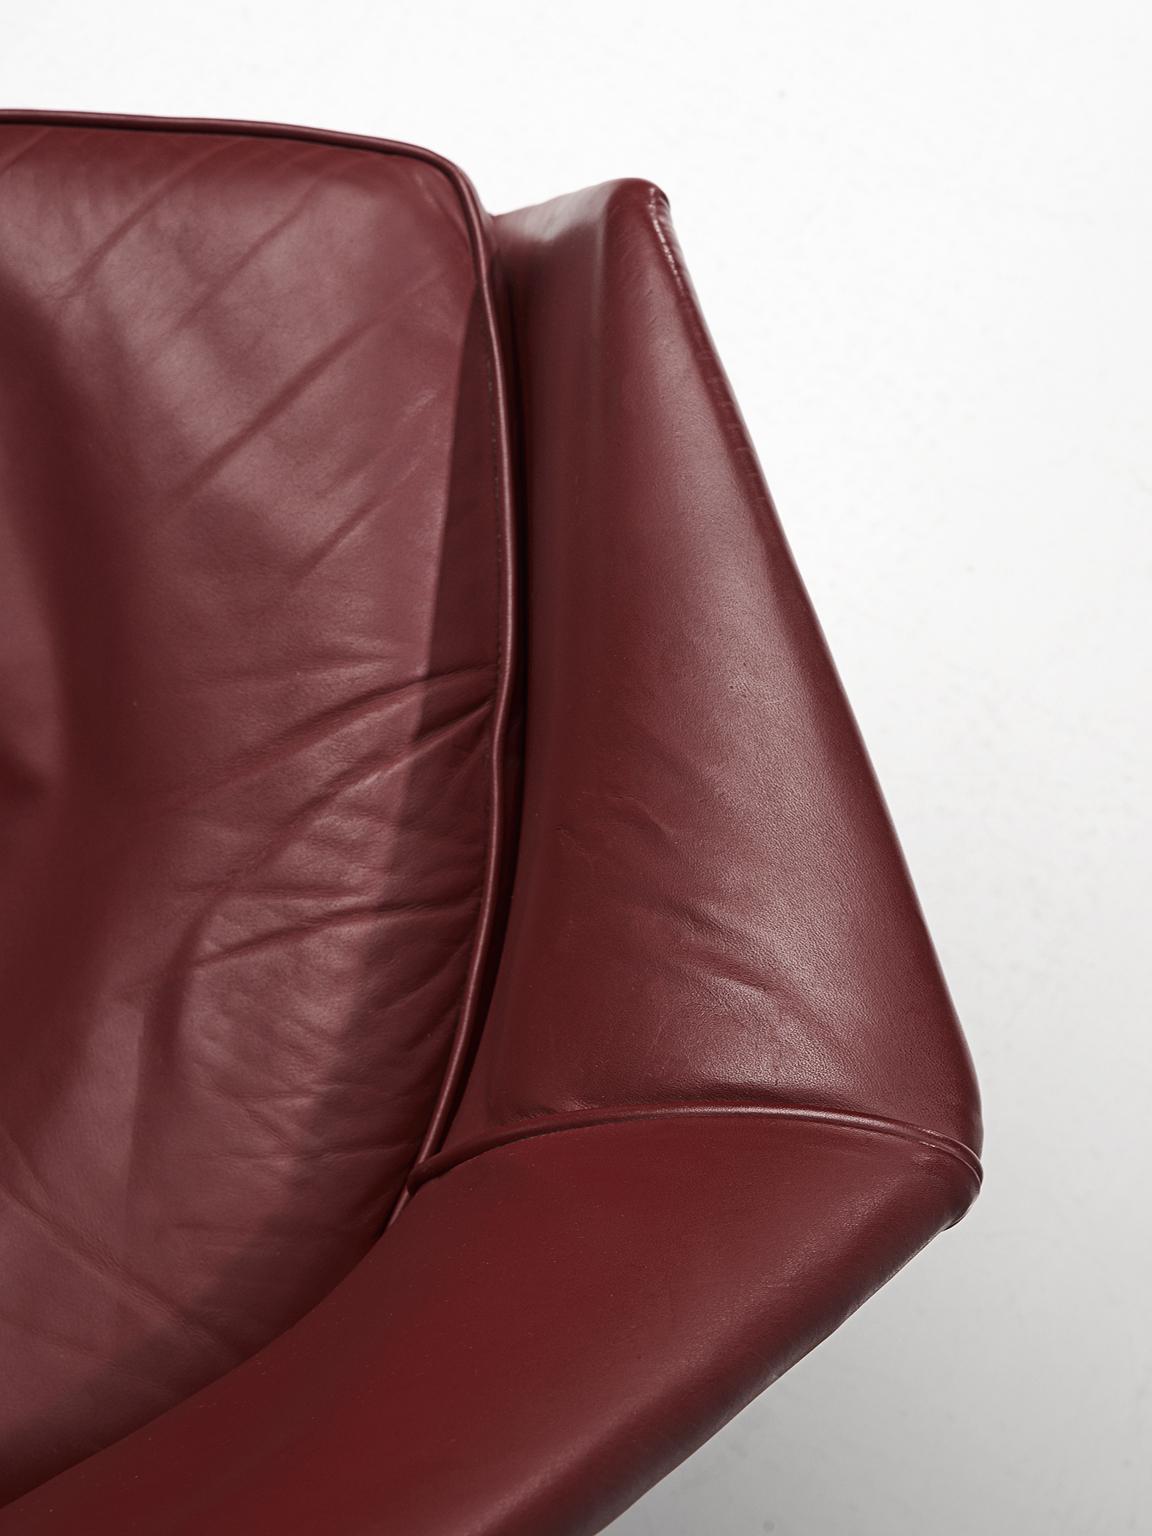 Ib Kofod-Larsen Lounge Chairs in Rosewood and Burgundy Leather 1